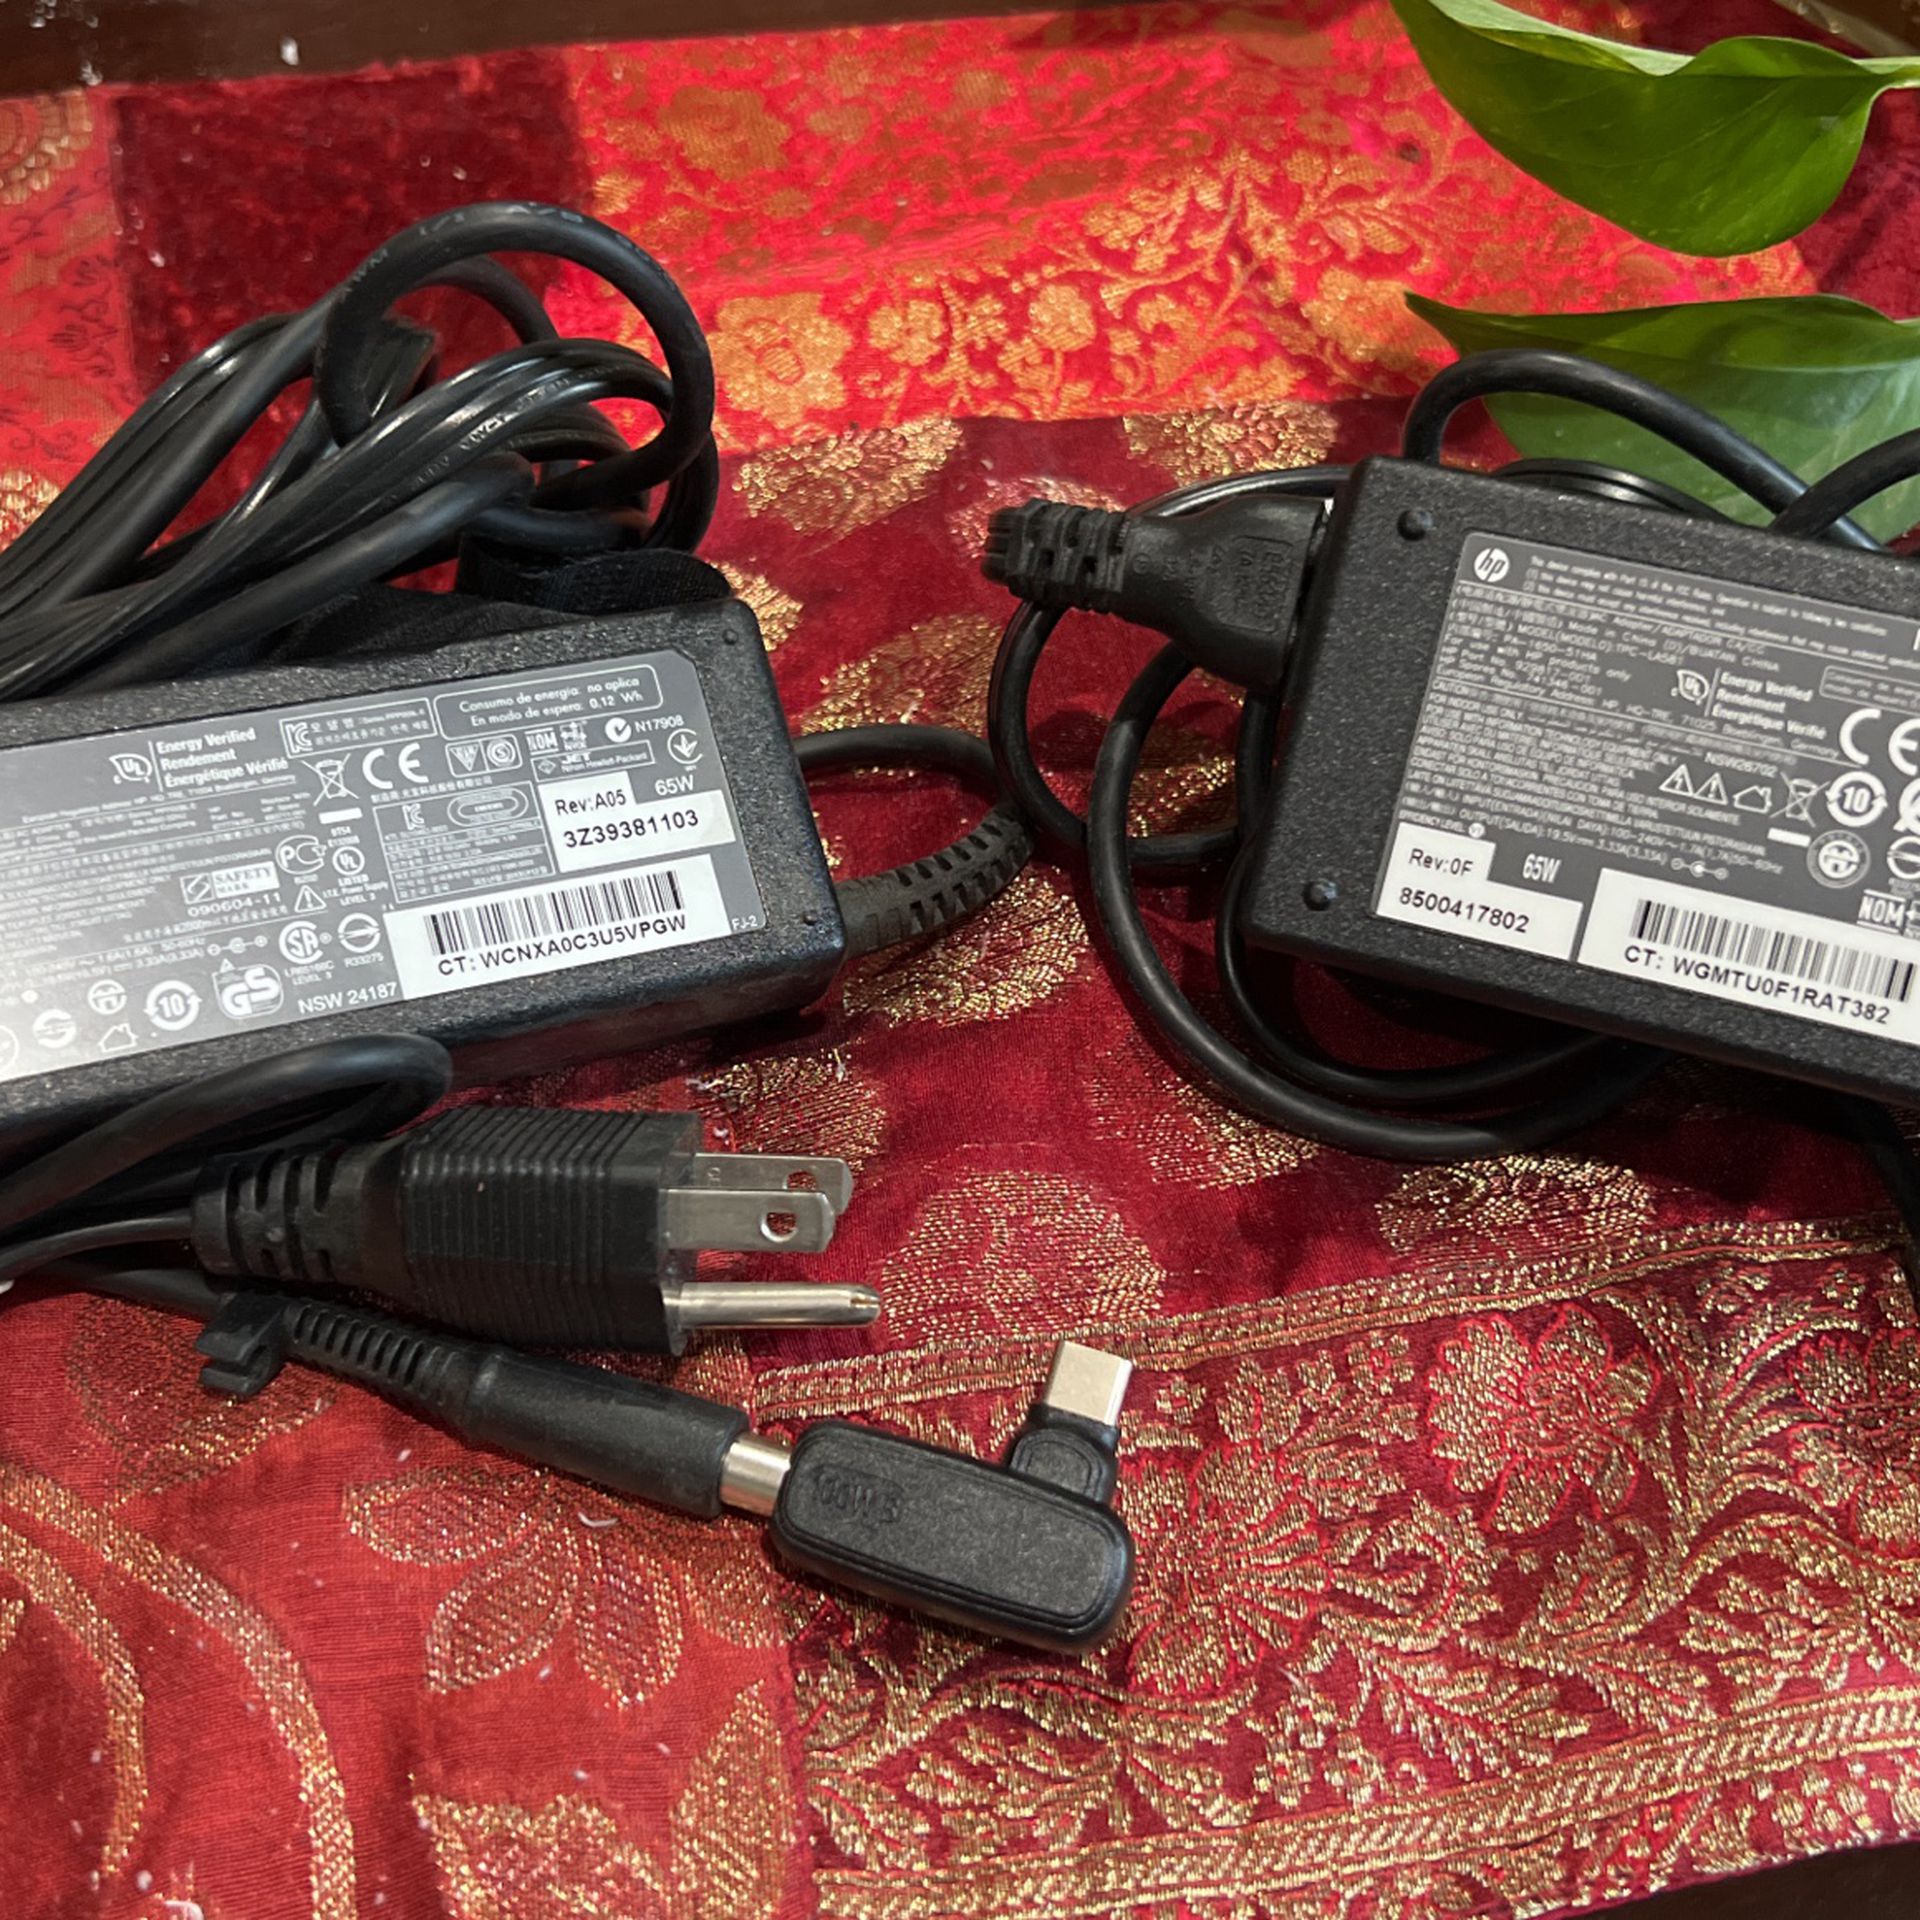 HP ORIGINAL CHARGERS 65 